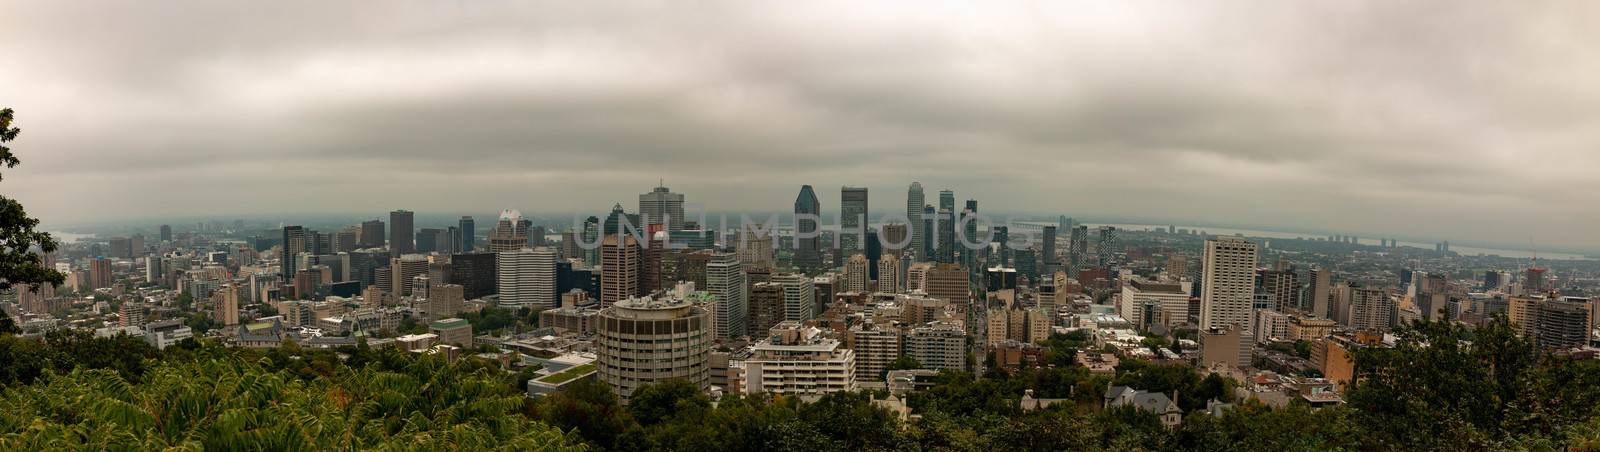 Montreal Panoramic view from Mont royal. This view was in September of 2020, and on a cloudy overcast day.  by mynewturtle1